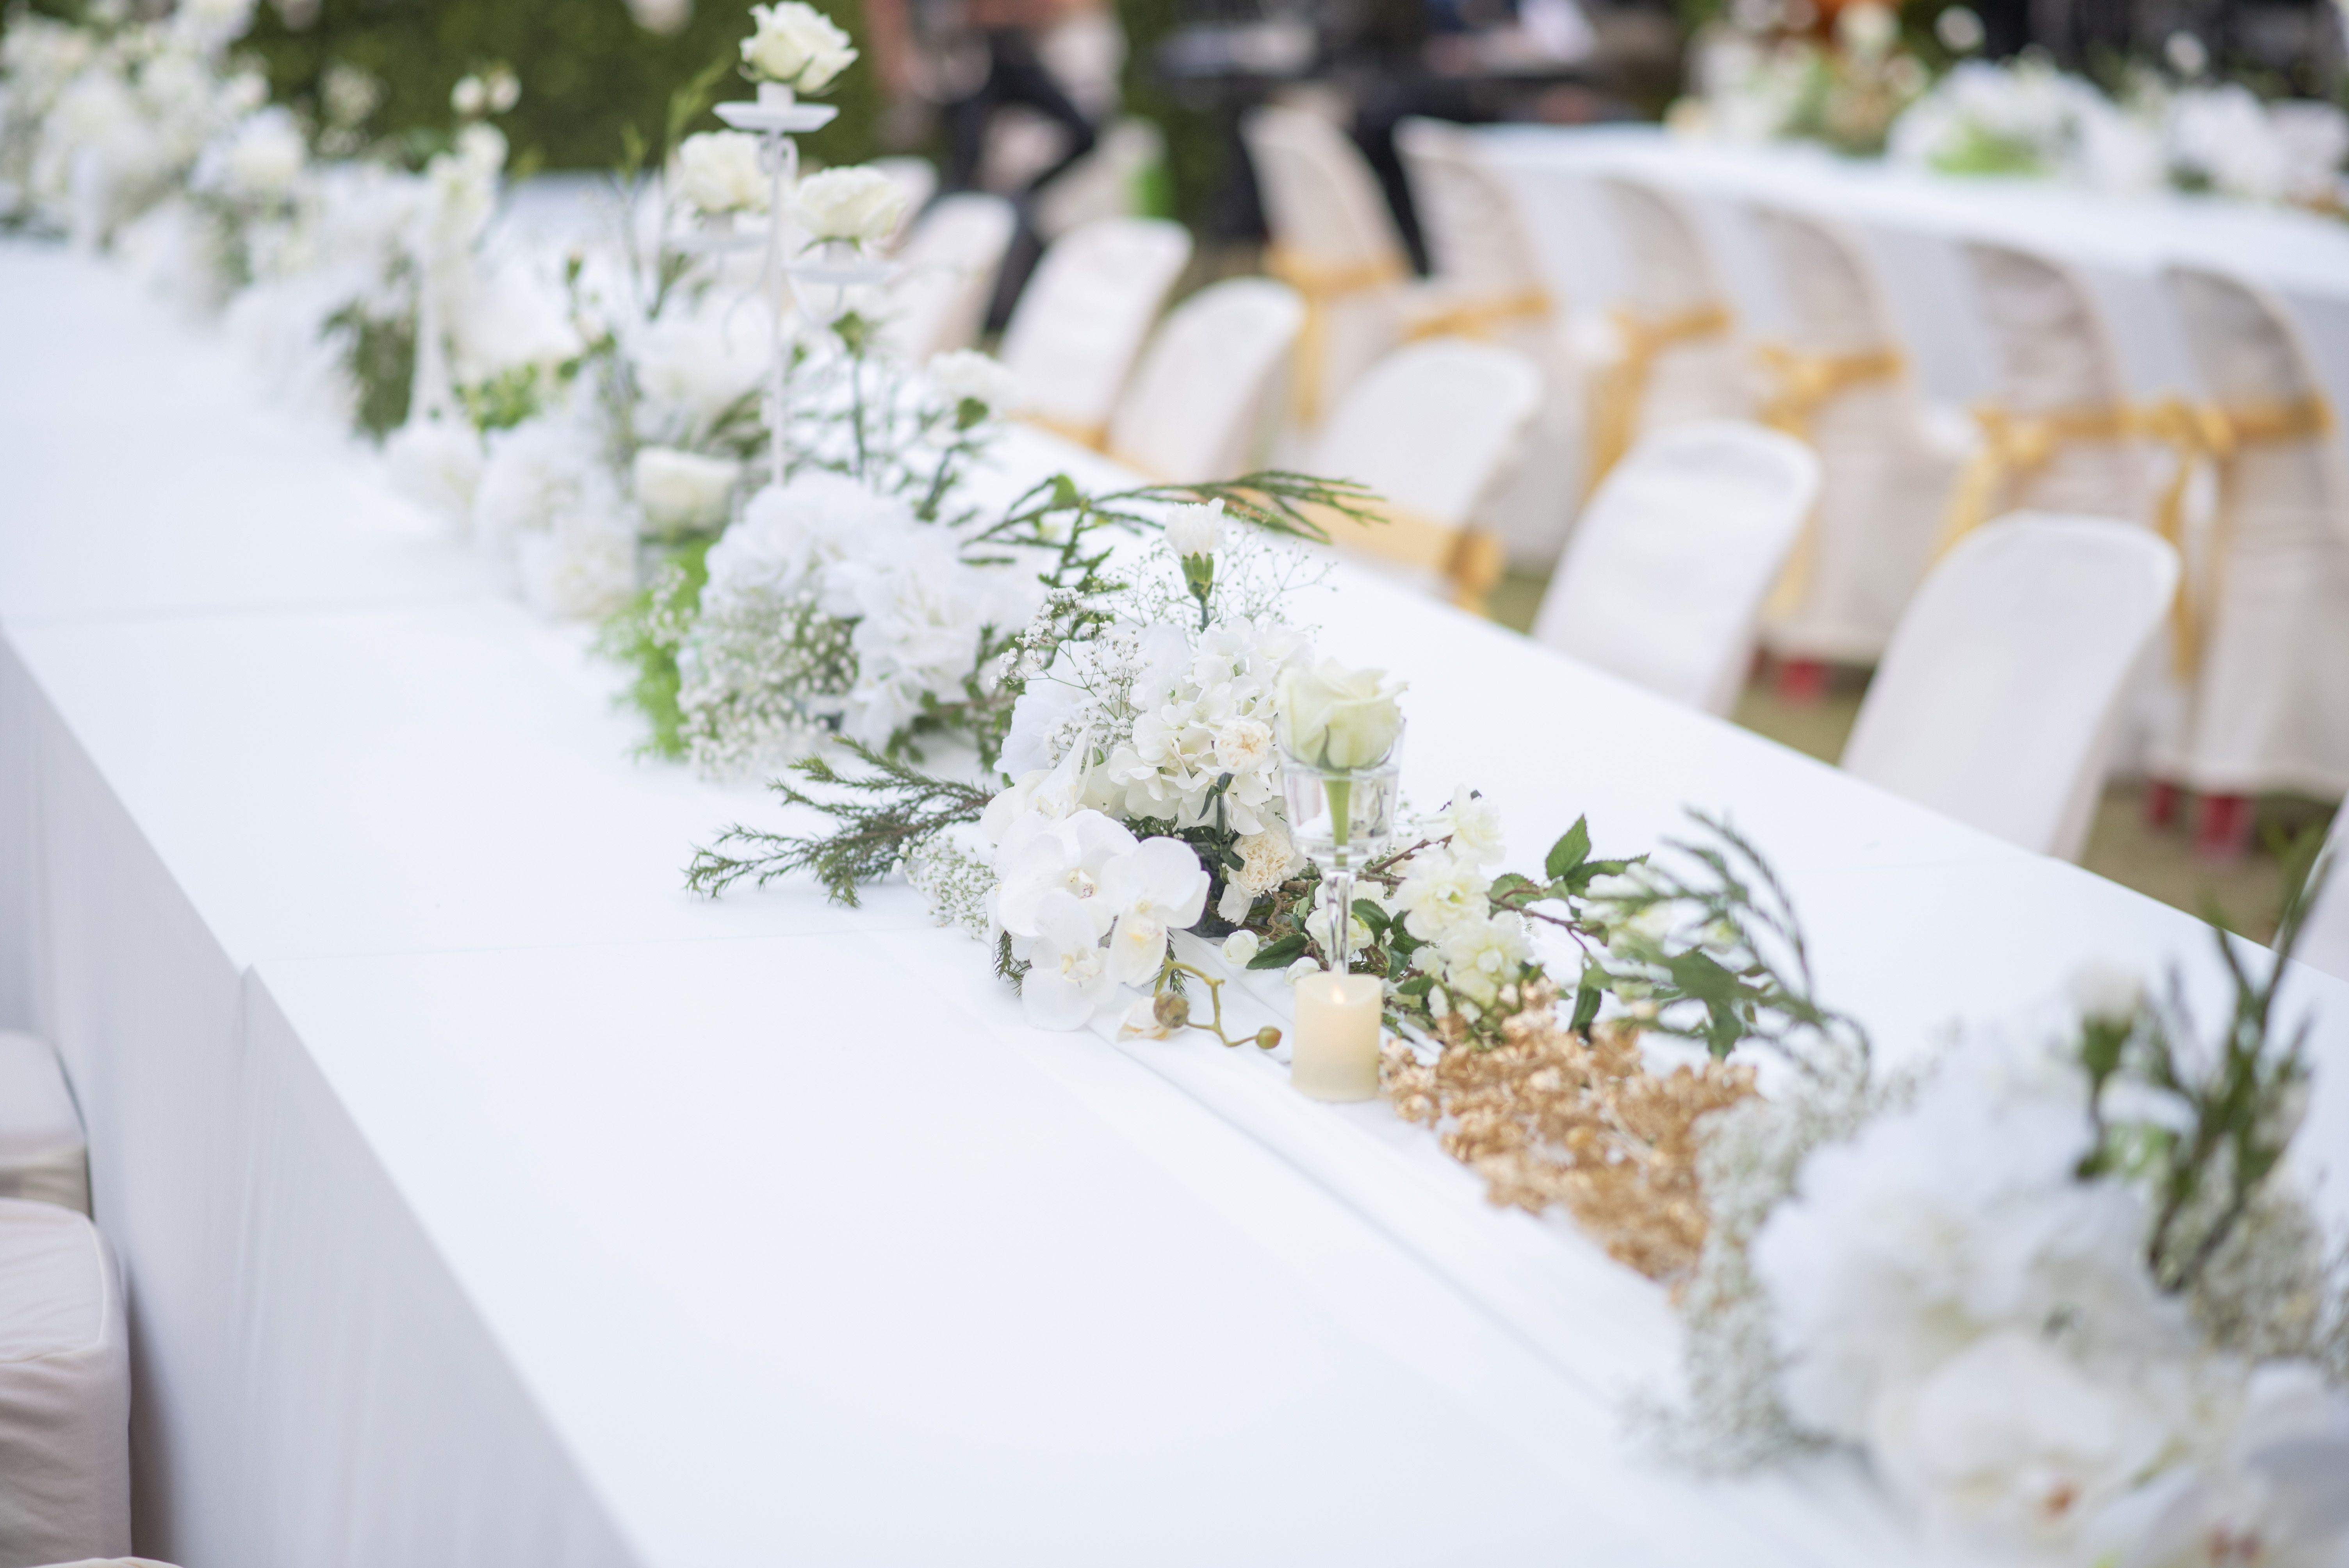 close up of flowers on table at wedding ceremony royalty free image 1147726215 1560231804